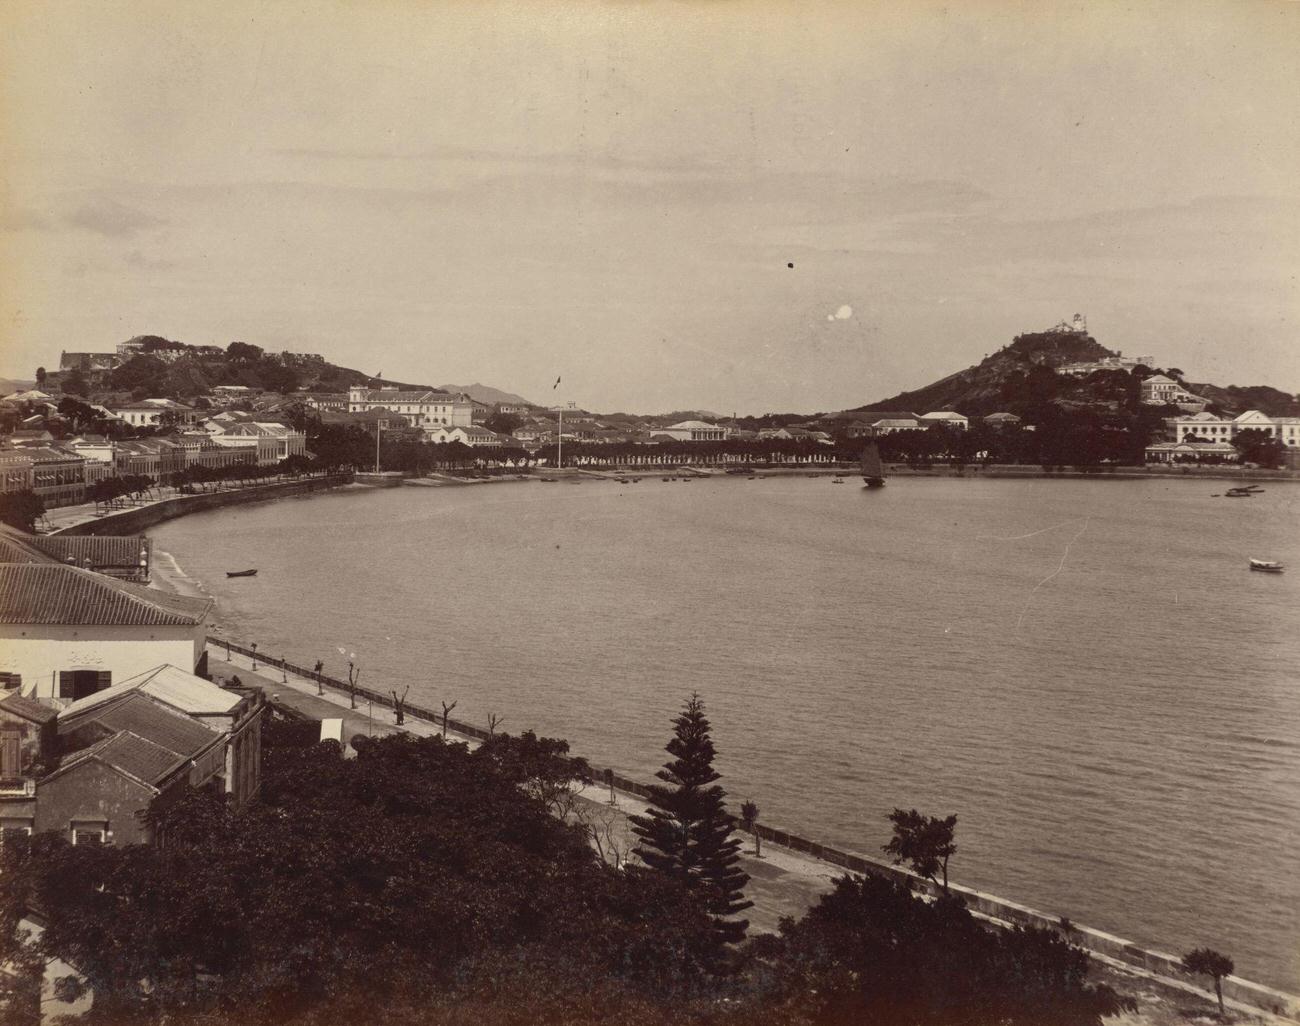 Macao, Attributed to John Thomson, 1870s